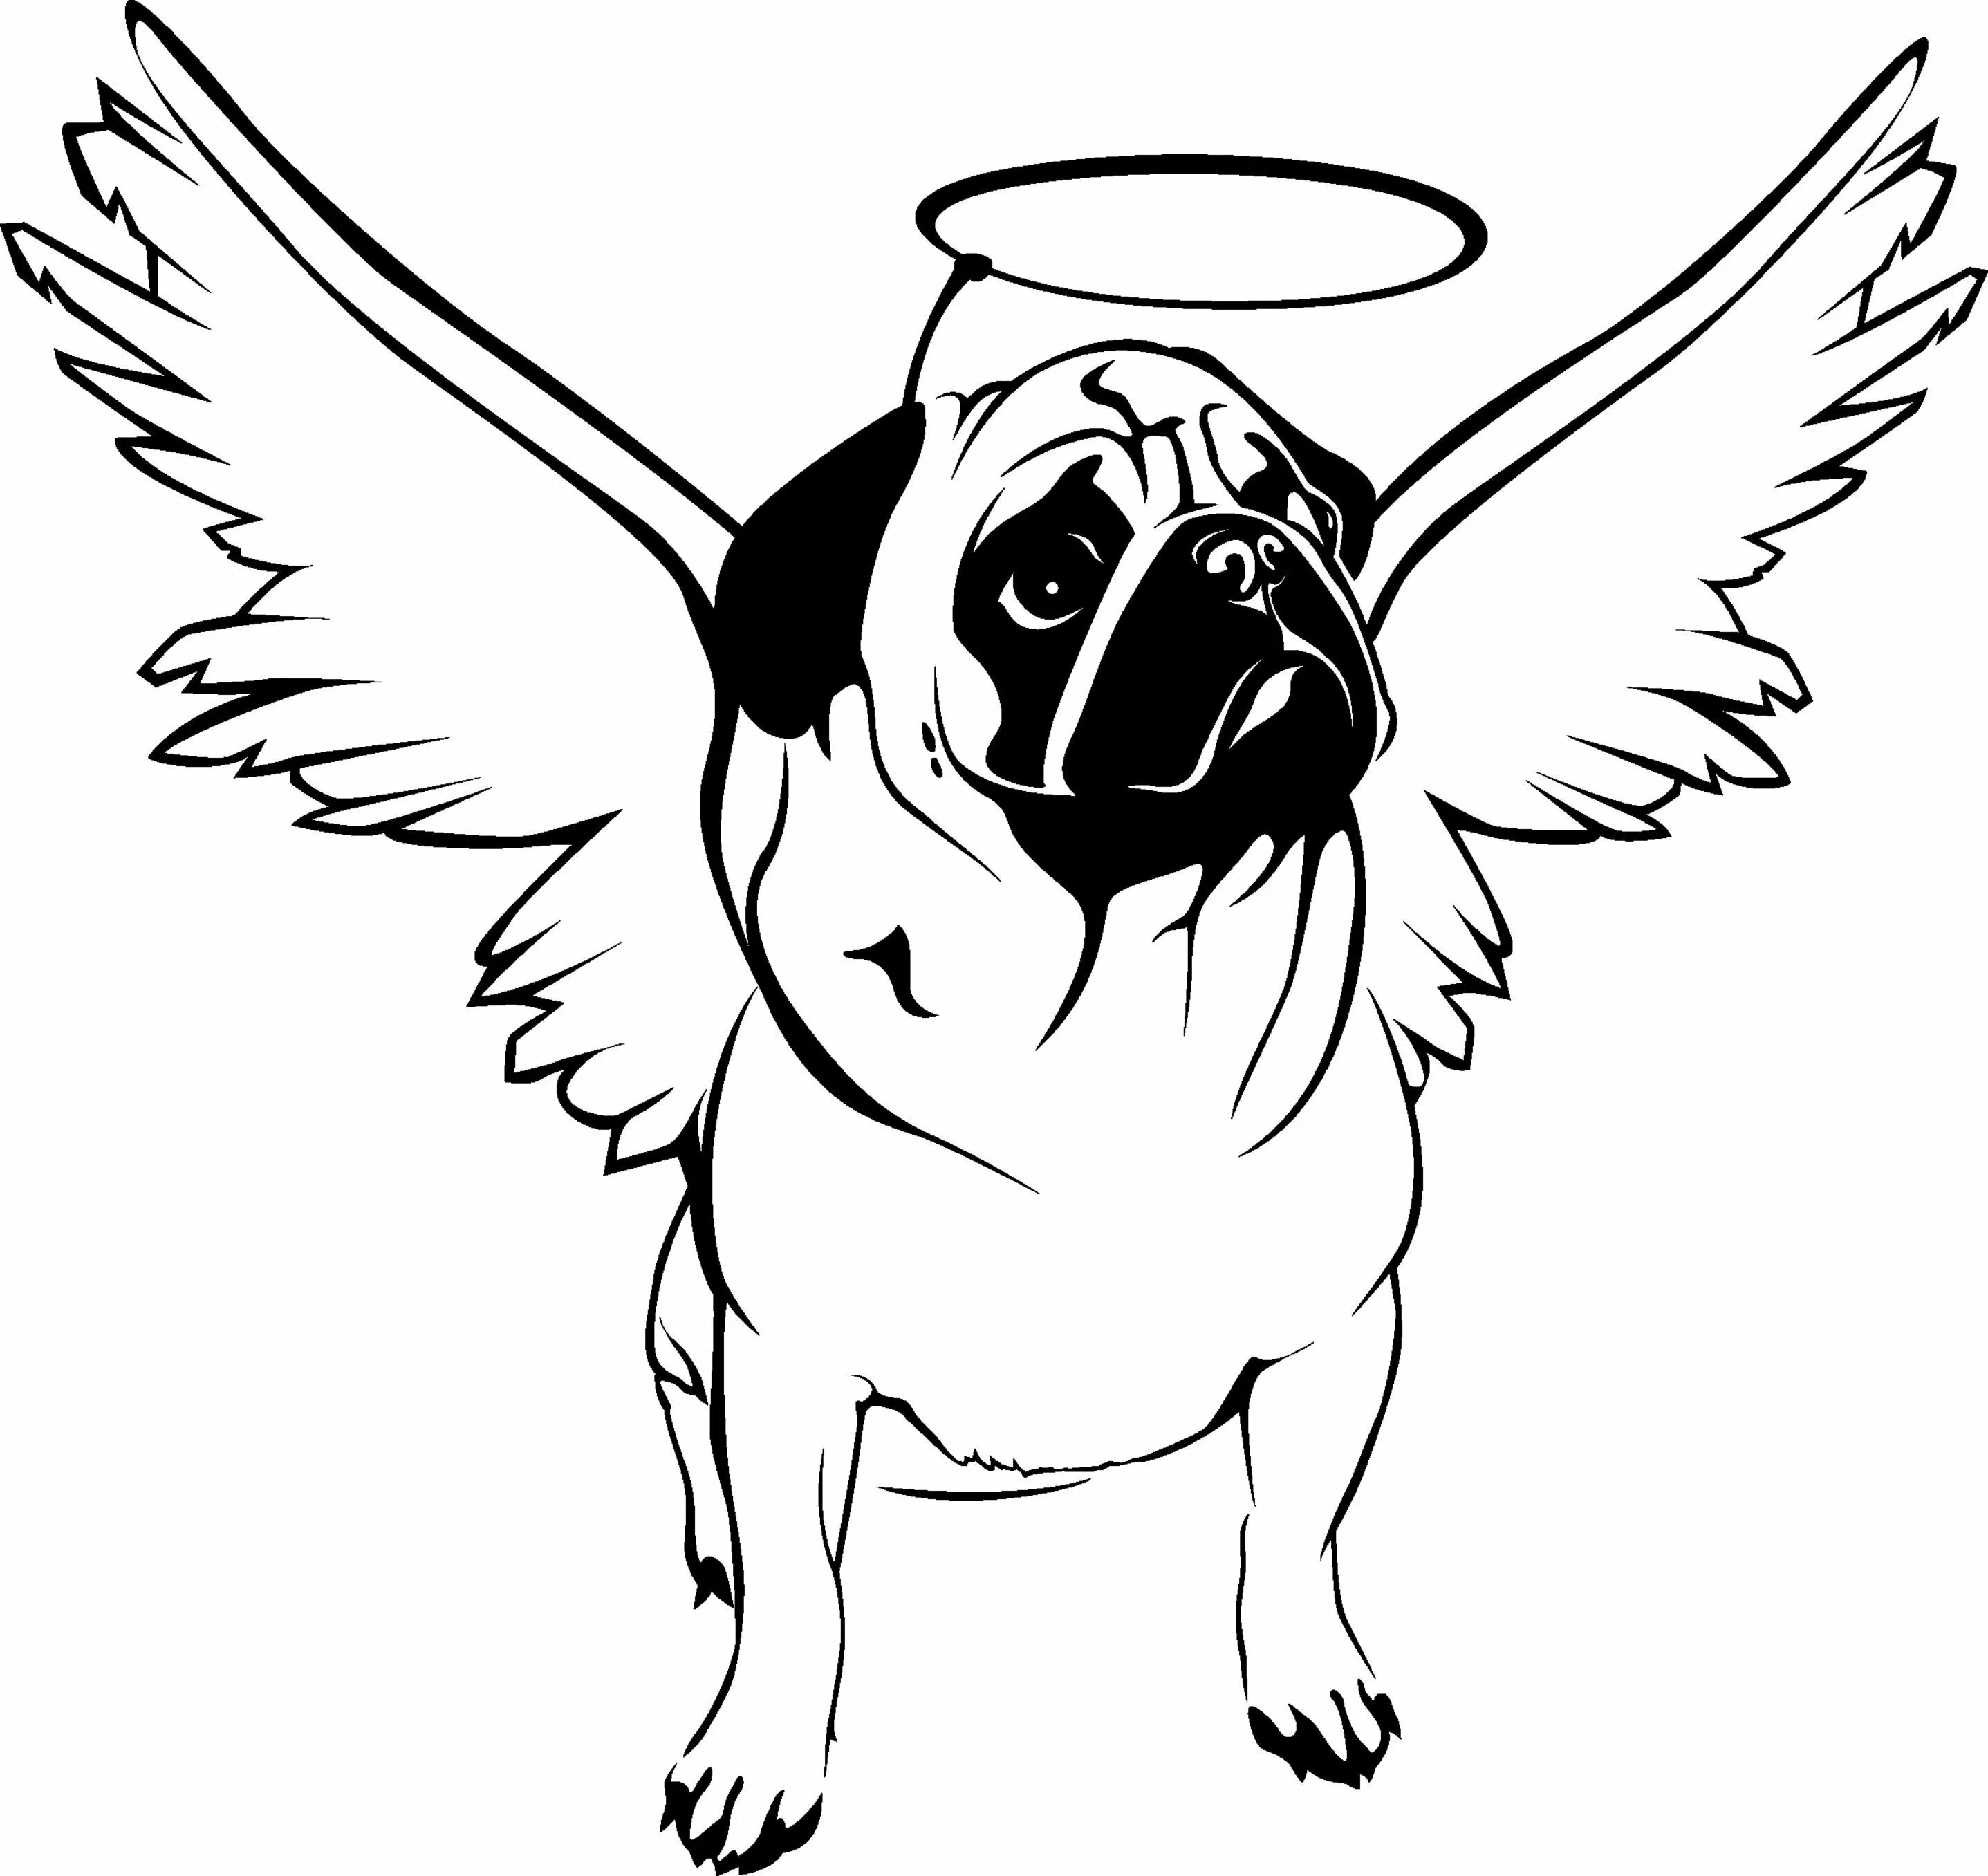 Zany pug coloring page for kids